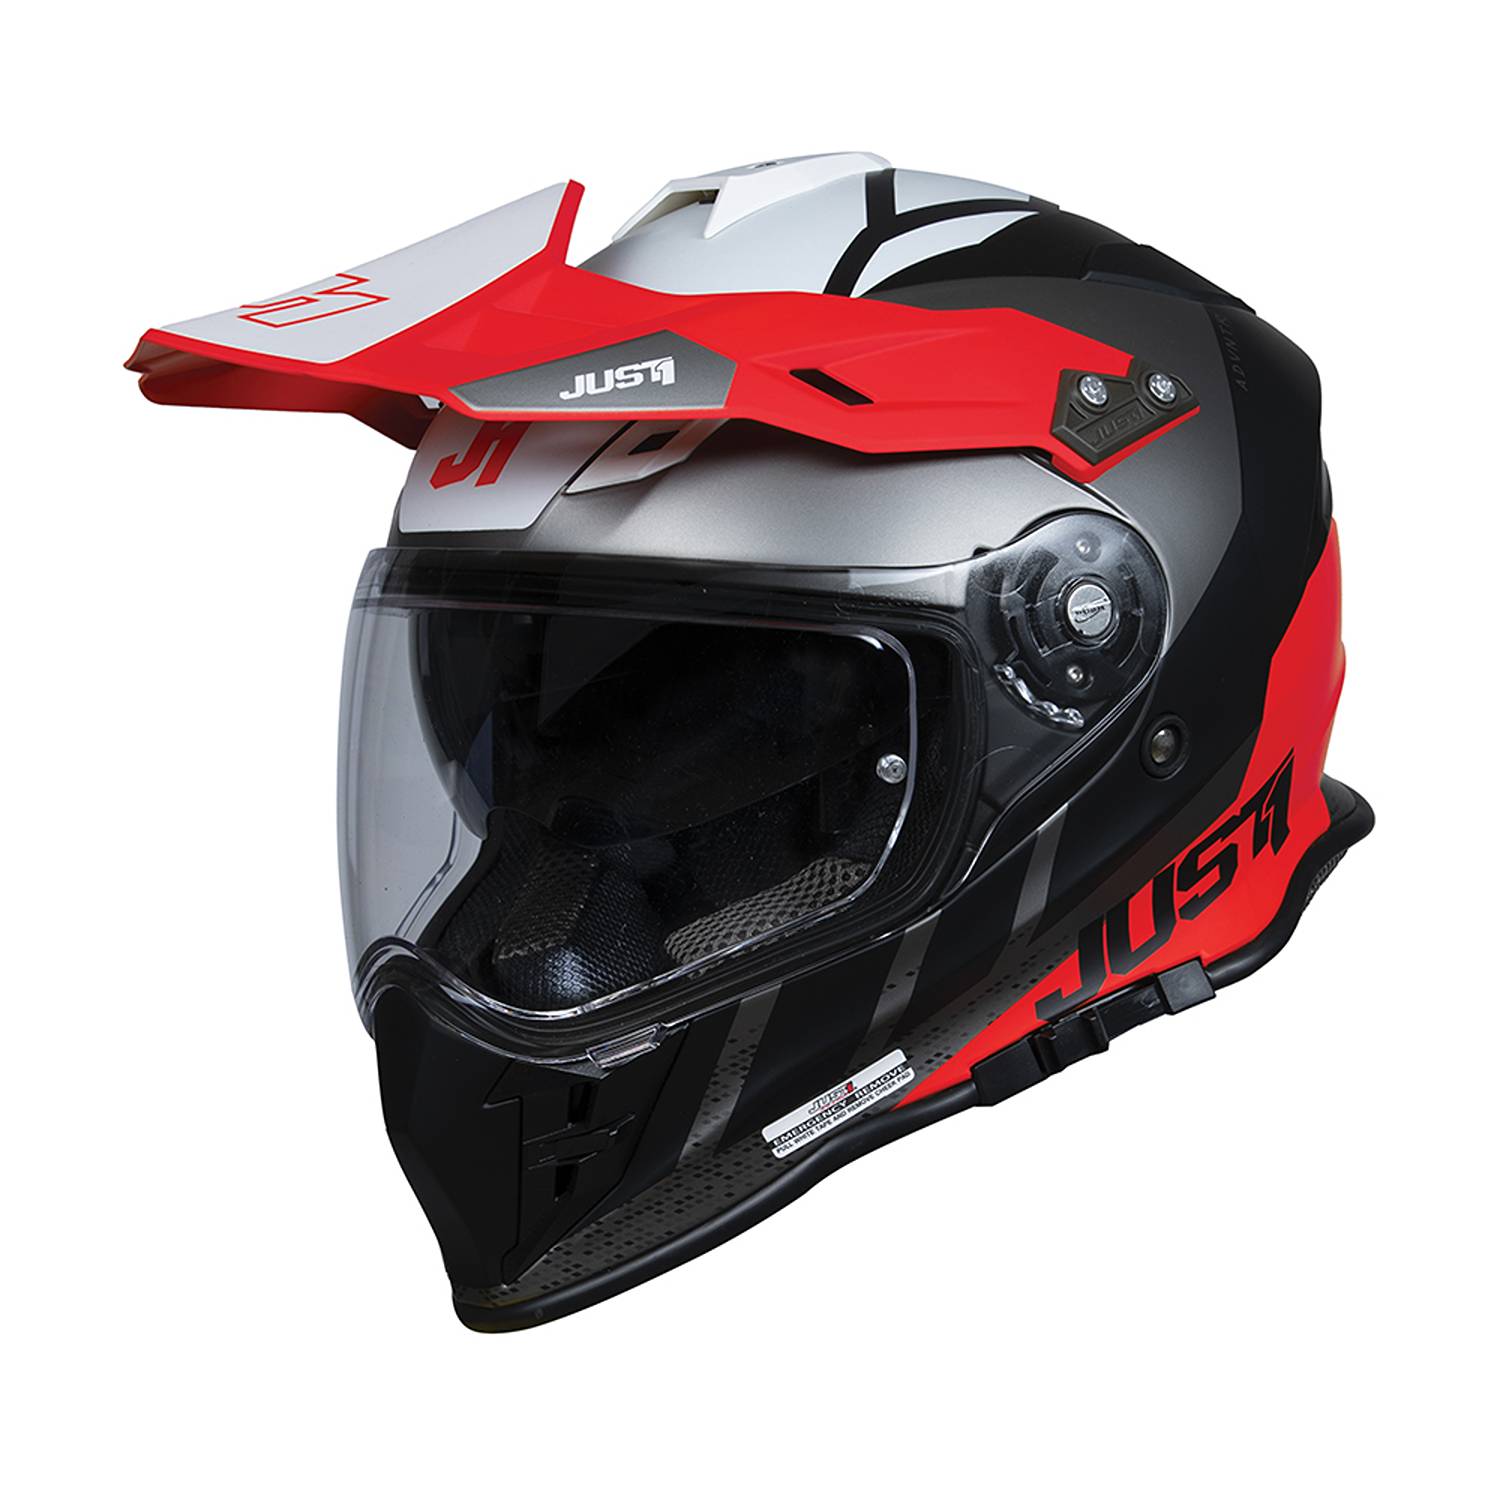 Image of Just1 J34 Pro Outerspace Black Red White Adventure Helmet Size L ID 8055774028011